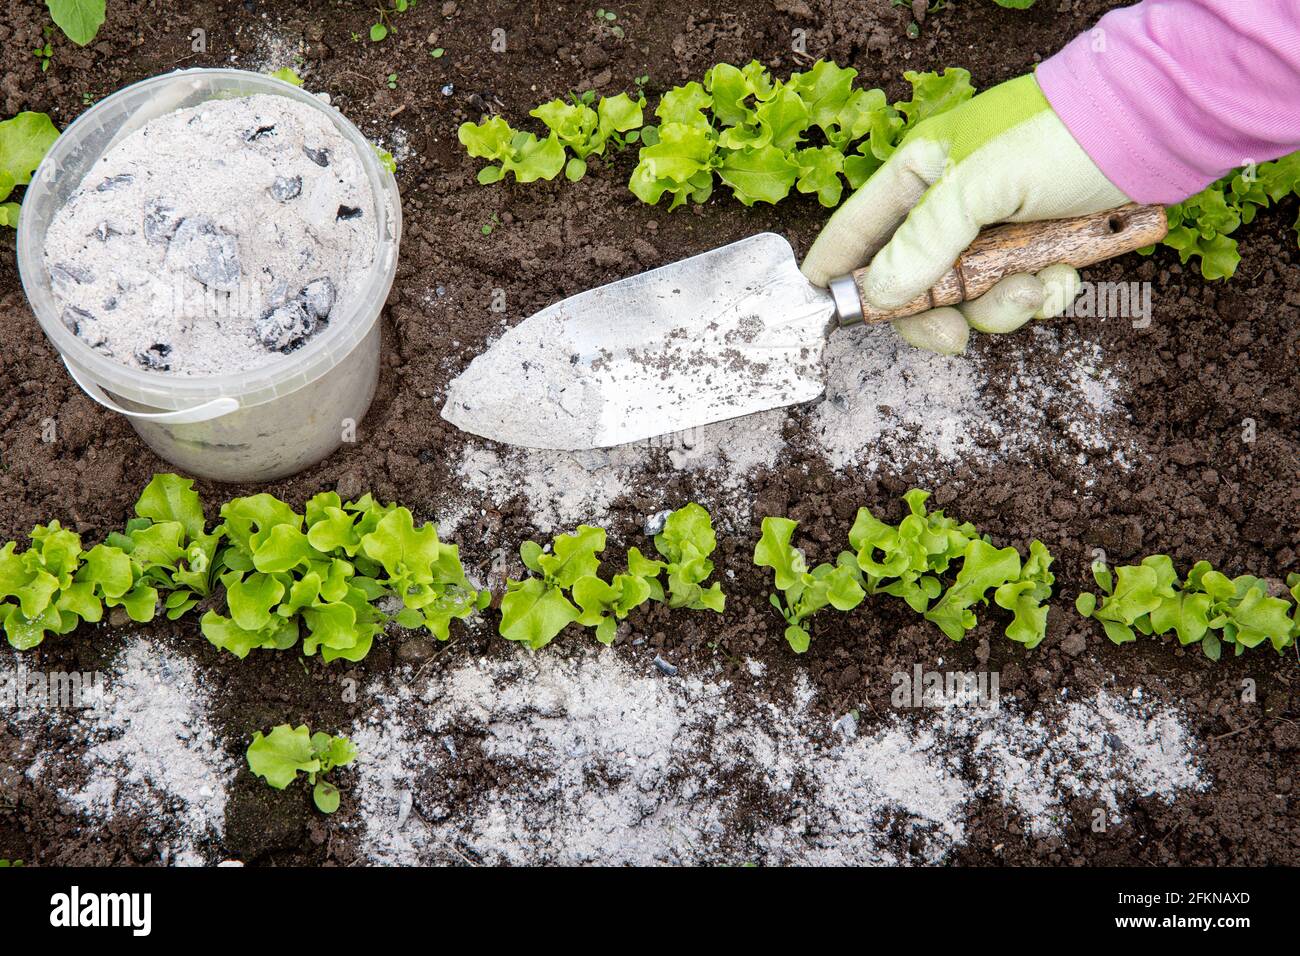 Gardener hand sprinkling wood burn ash from small garden shovel between lettuce herbs for non-toxic organic insect repellent on salads. Stock Photo